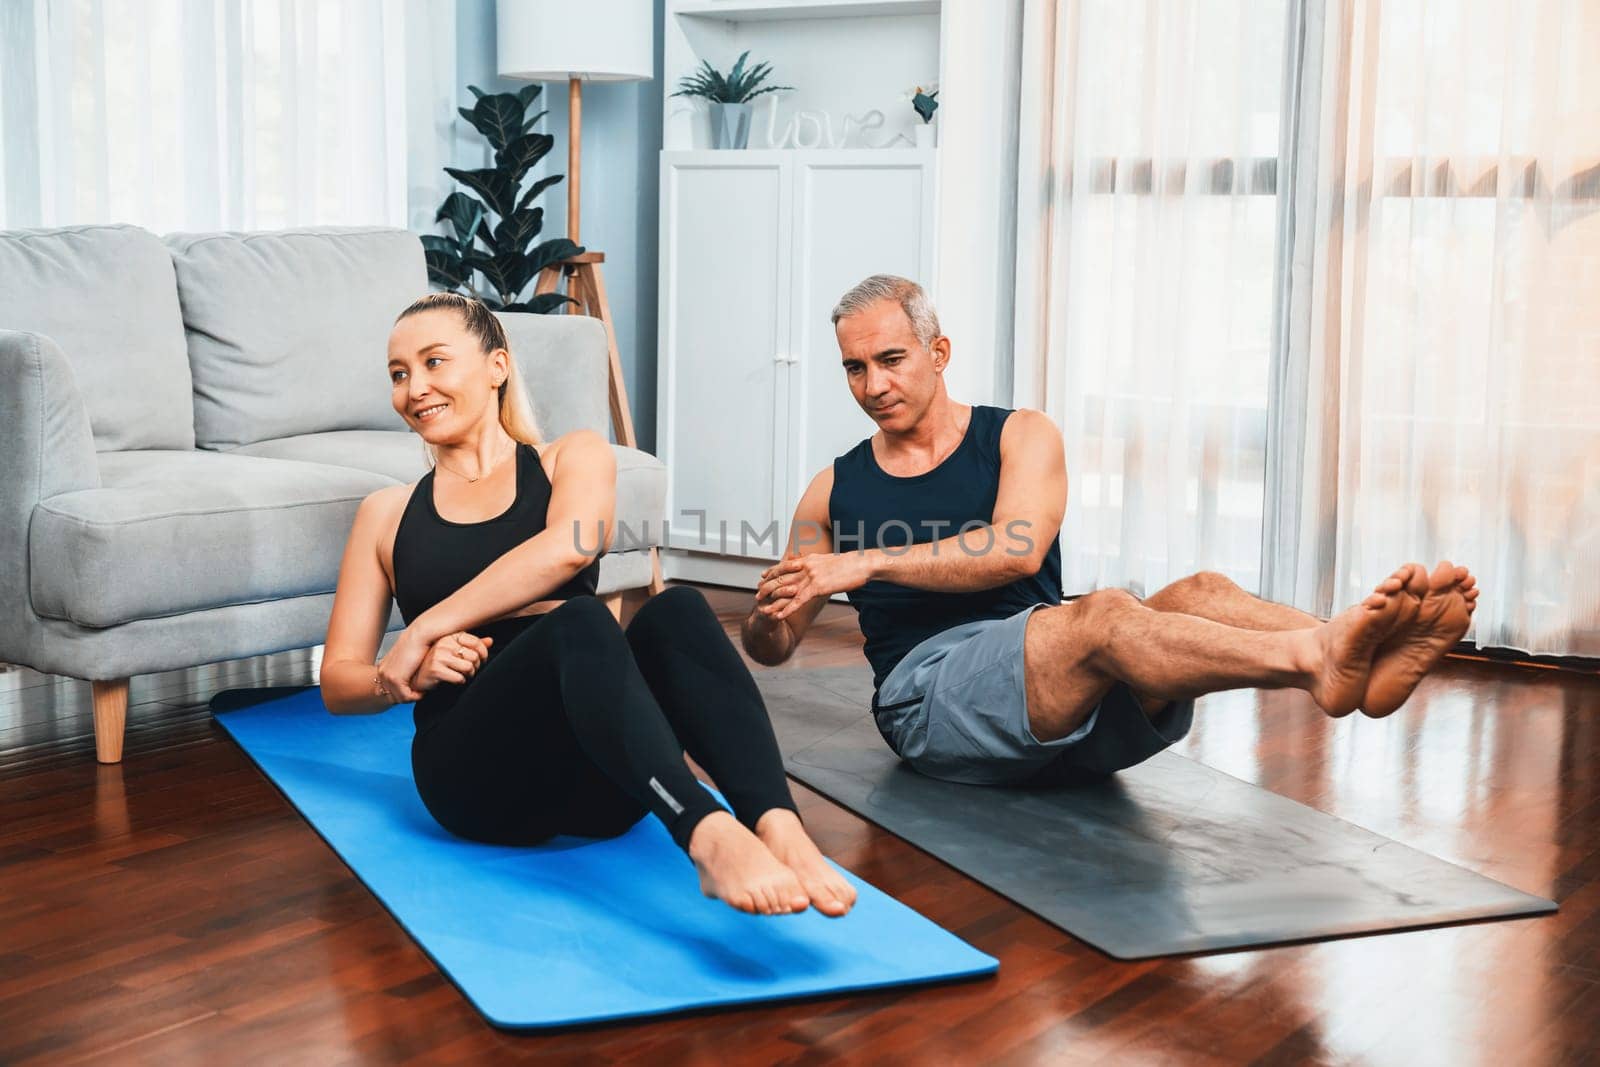 Athletic and sporty senior couple engaging matt exercising and doing crunch together at home exercise as concept of healthy fit body lifestyle after retirement. Clout